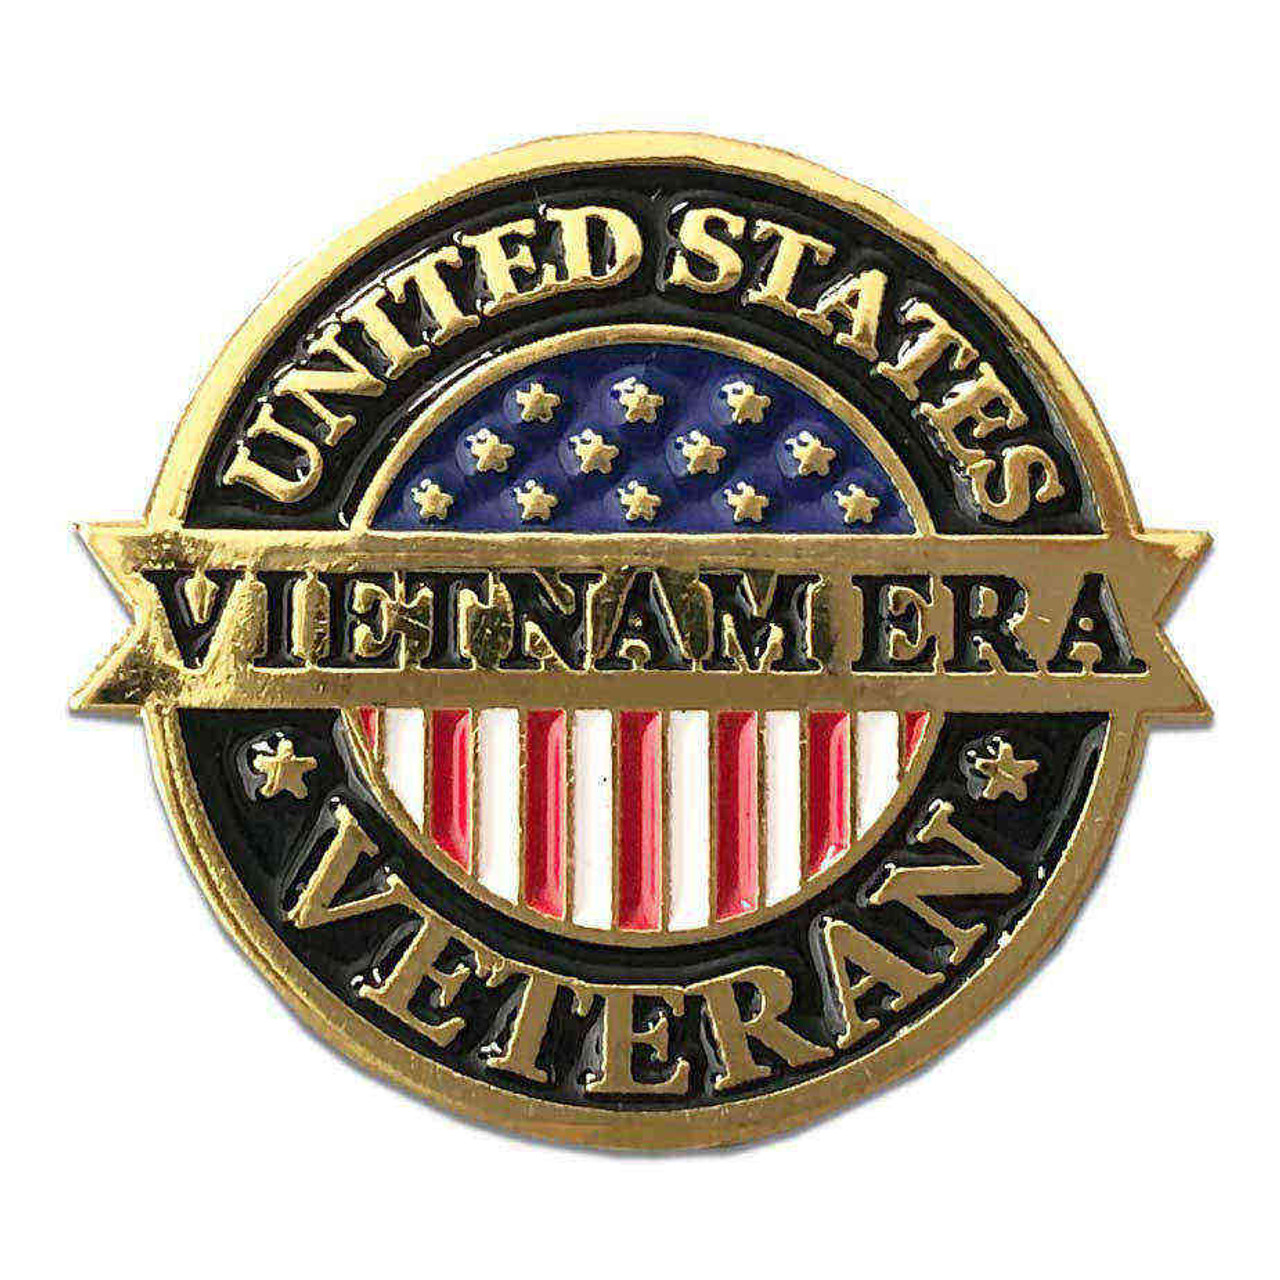 Us Veteran Lapel Pin With Vietnam Era Text And Flag Graphic 2302